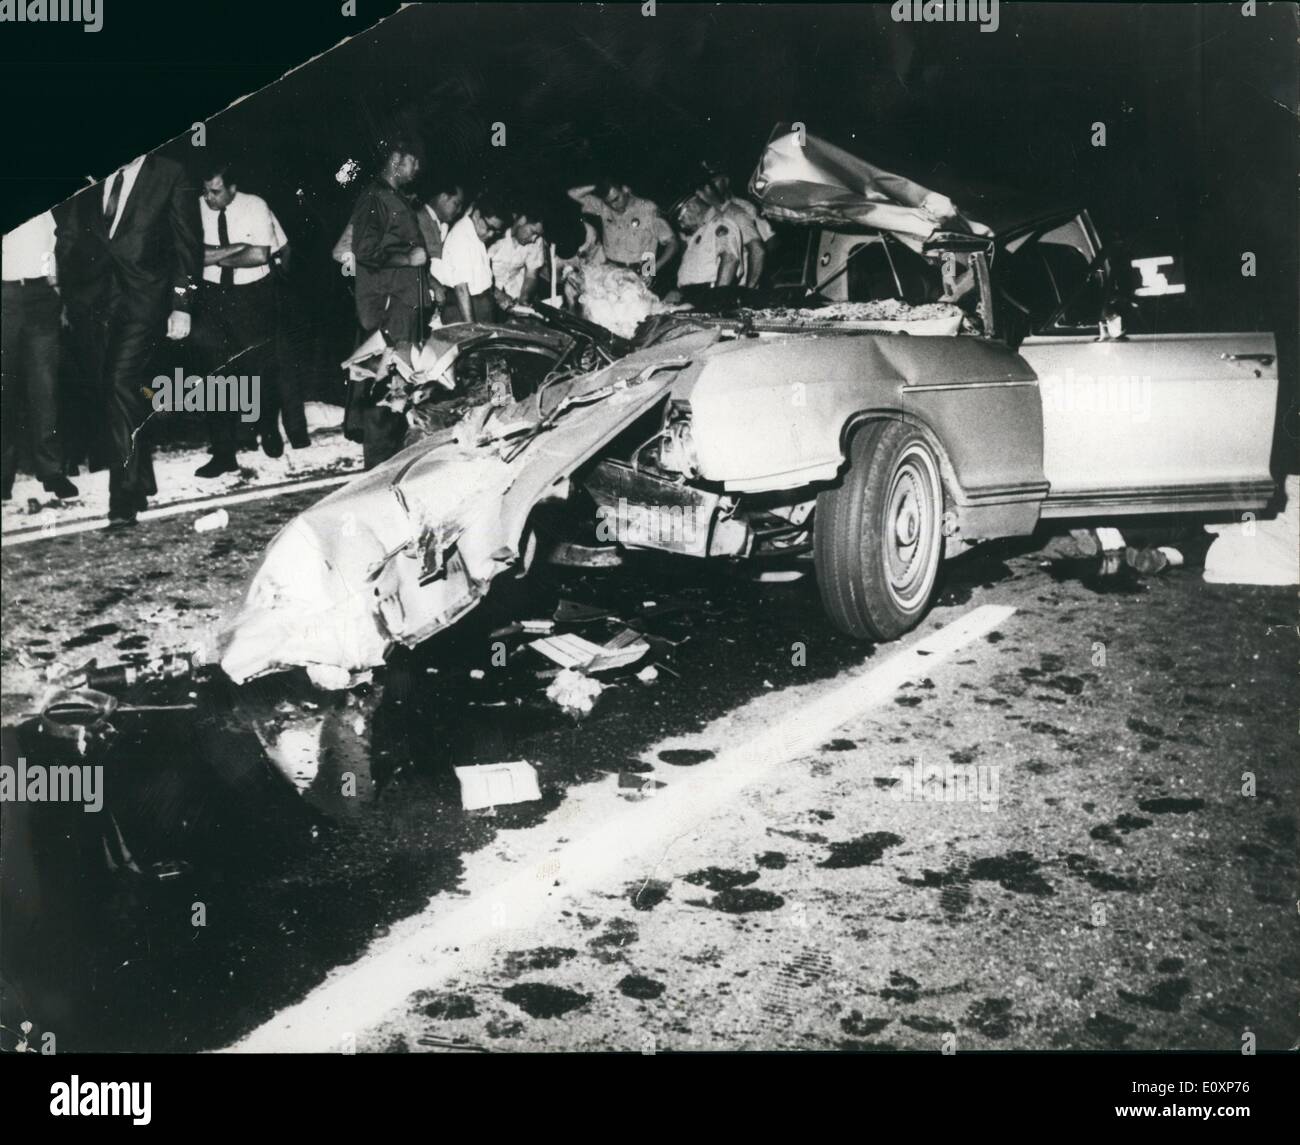 Jul. 07, 1967 - Jayne Mansfield Killed In Car Crash. Photo shows The scene after the car crash in which Jayne Mansfield, 33, Hollywood actress and cabaret performer, was killed, near New Orleans on Thursday (June 29). Also killed were her lawyer companion, Mr. Samuel Brody, and her chauffeur, Mr. Ronnie Harrison. Three of her children were injured. Stock Photo